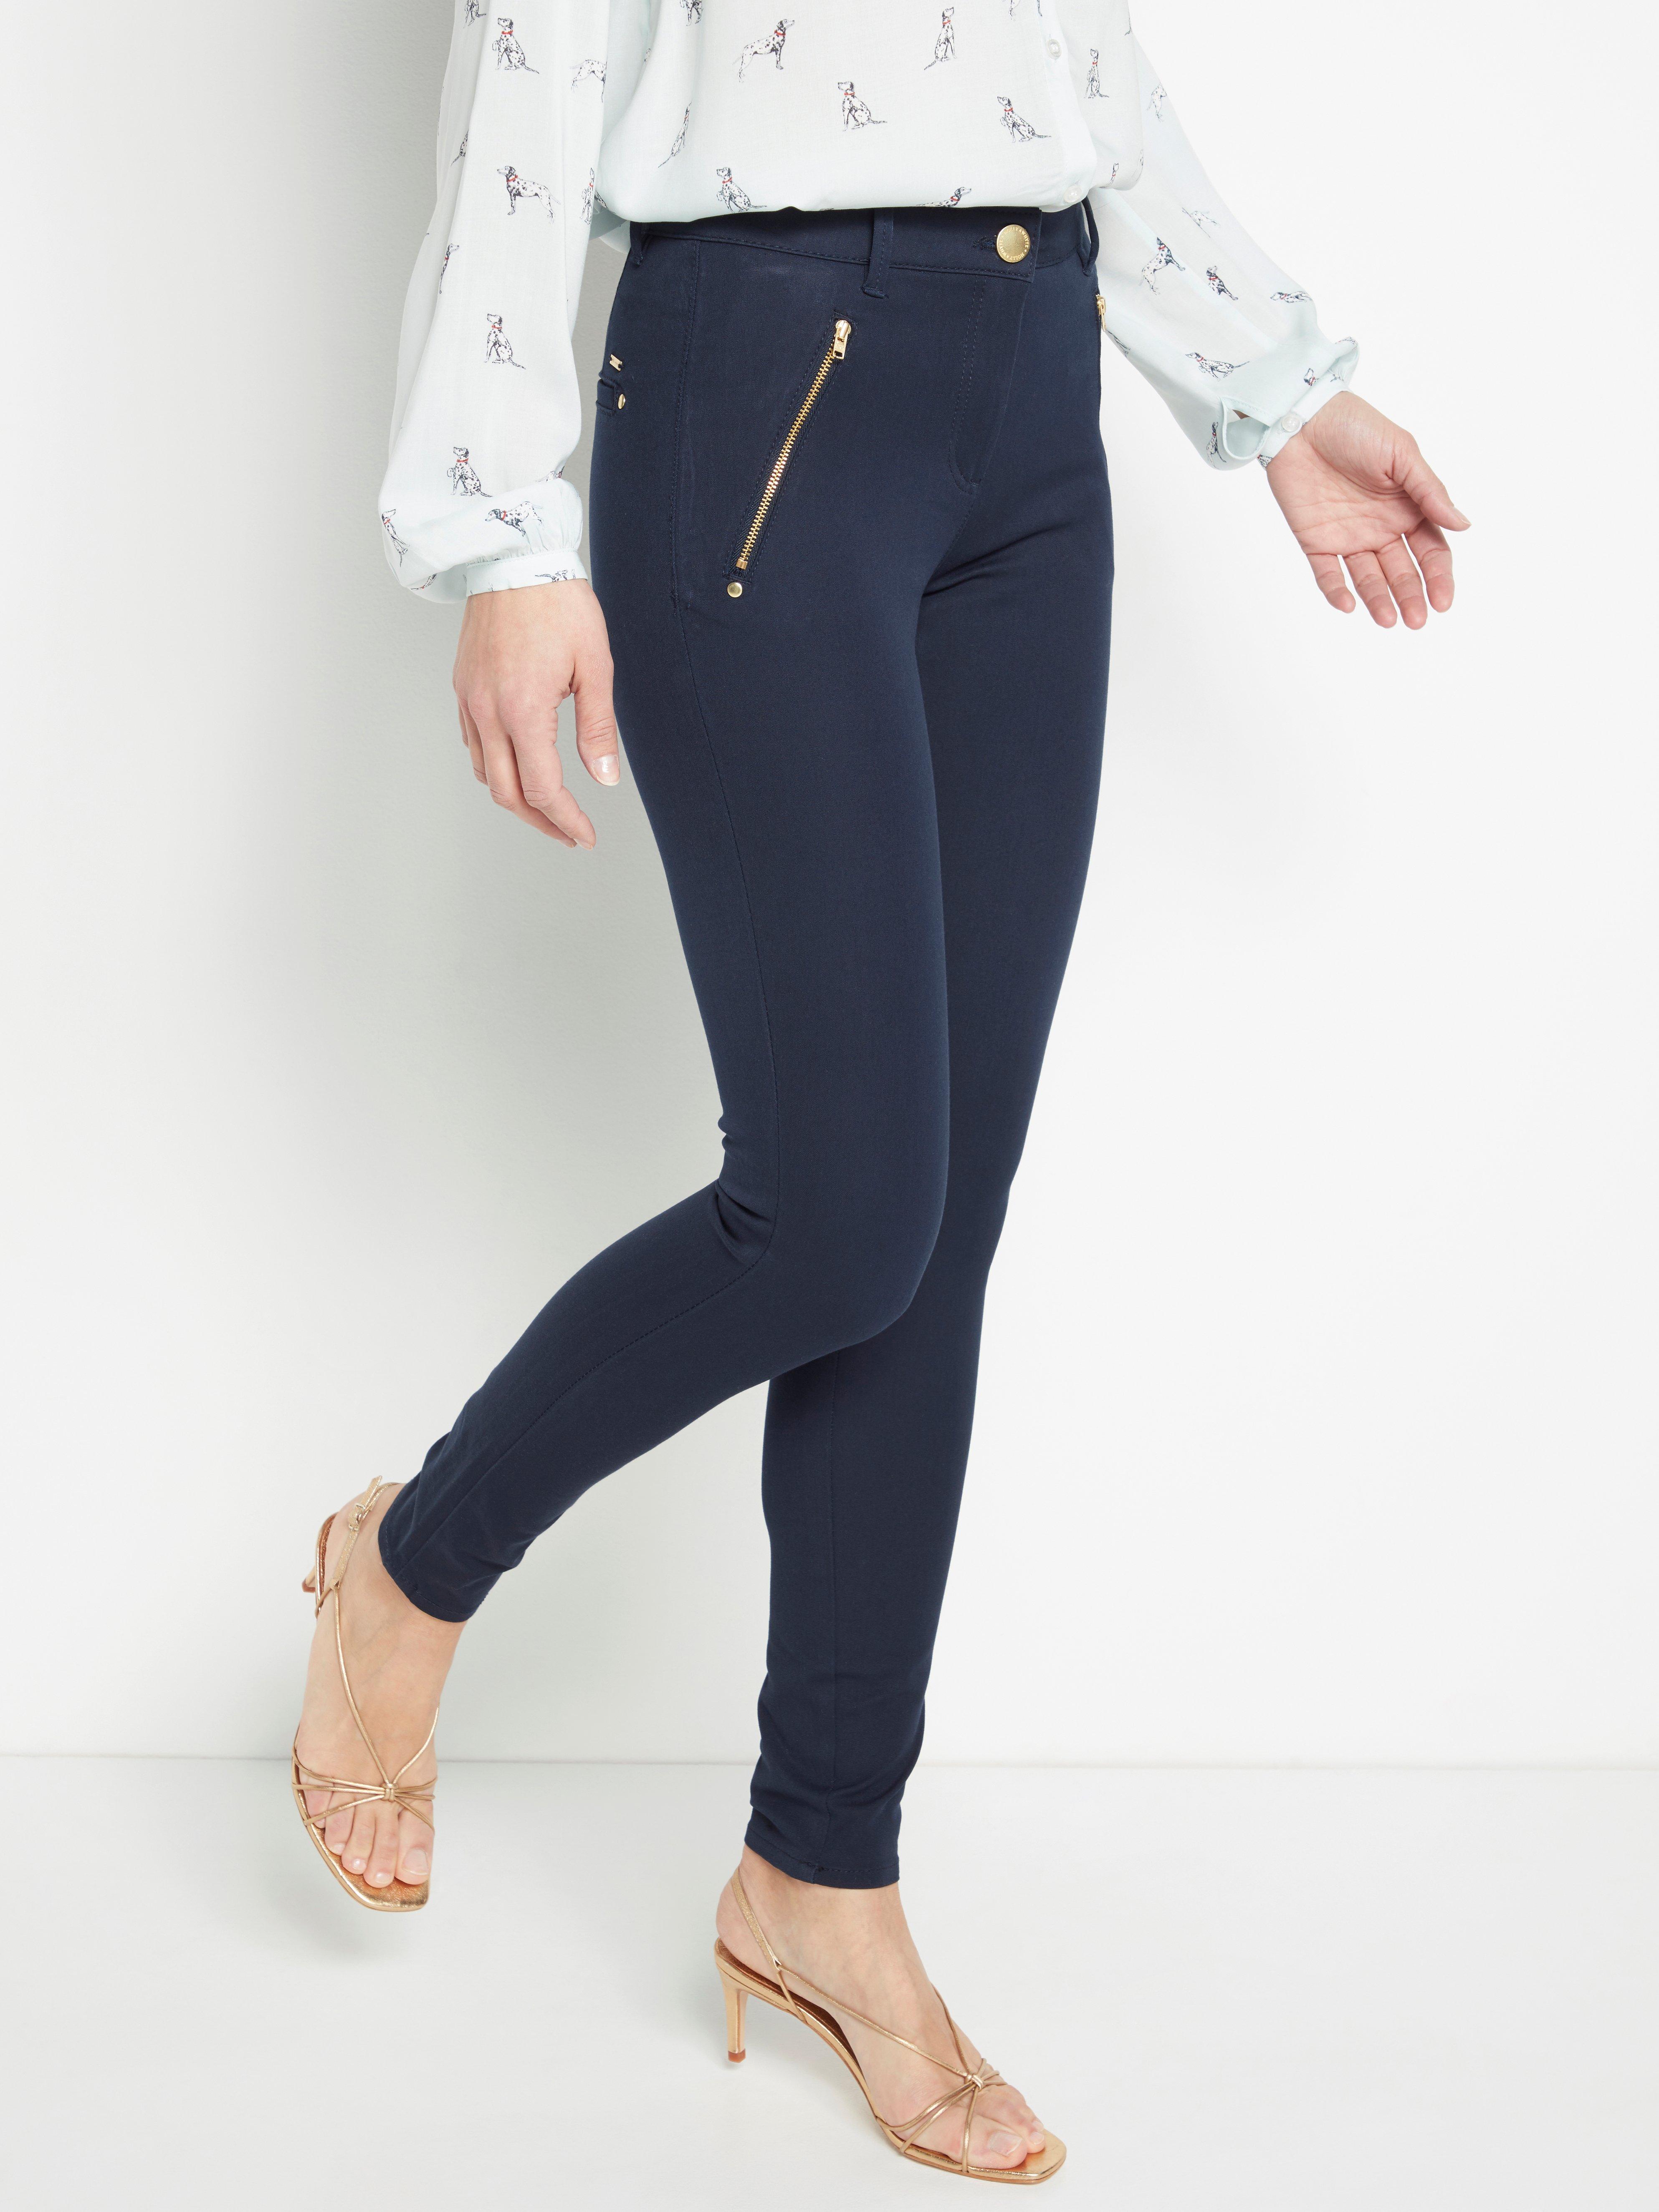 navy blue skinny trousers